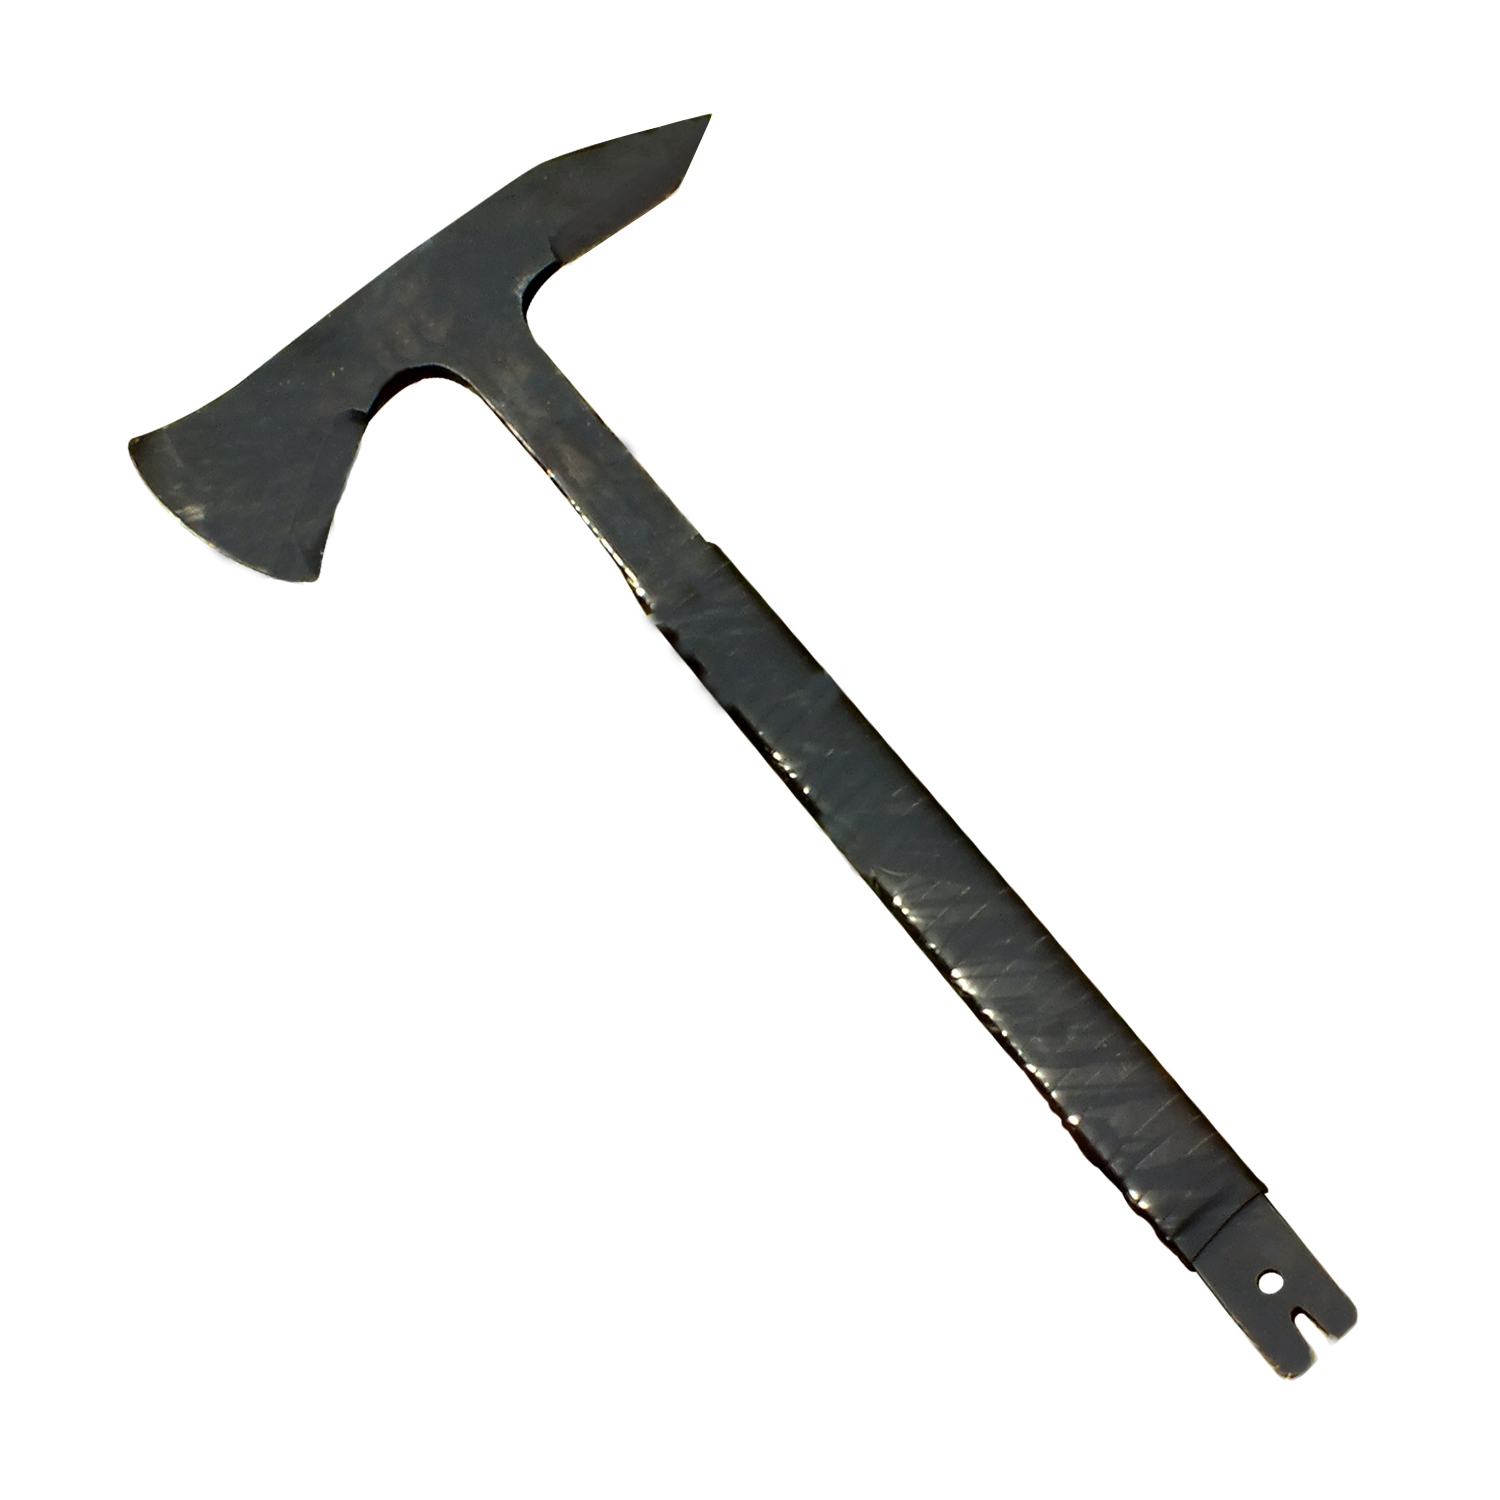 High Carbon Steel Rescue Tomahawk Axe with Pry Bar and Spike